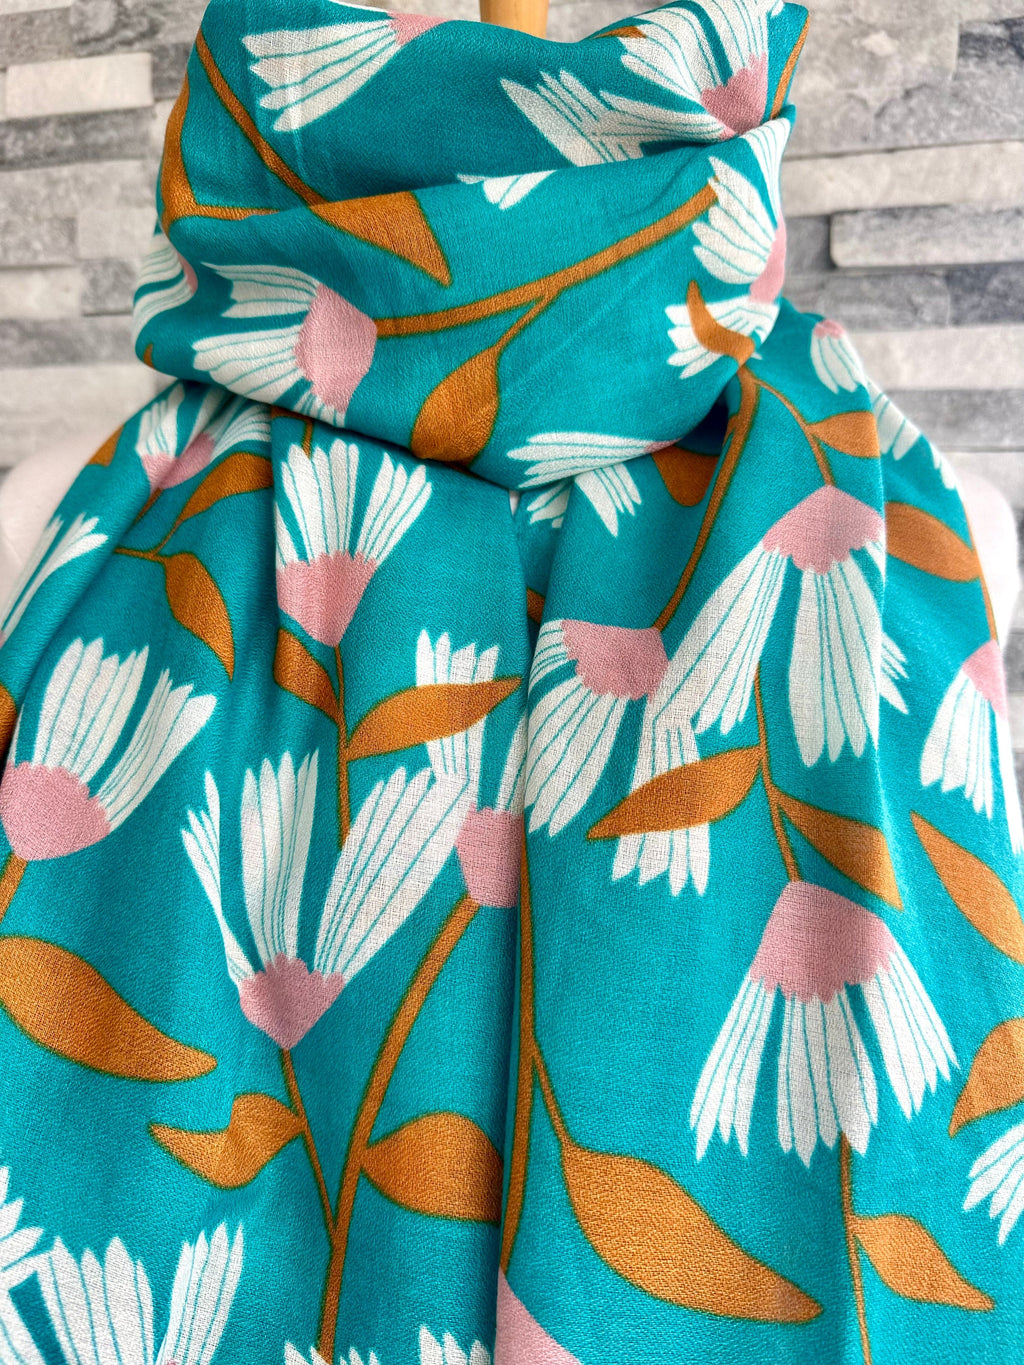 lusciousscarves Red Cuckoo Trailing Flowers Design Scarf , Turquoise , Pink , White and Rust.